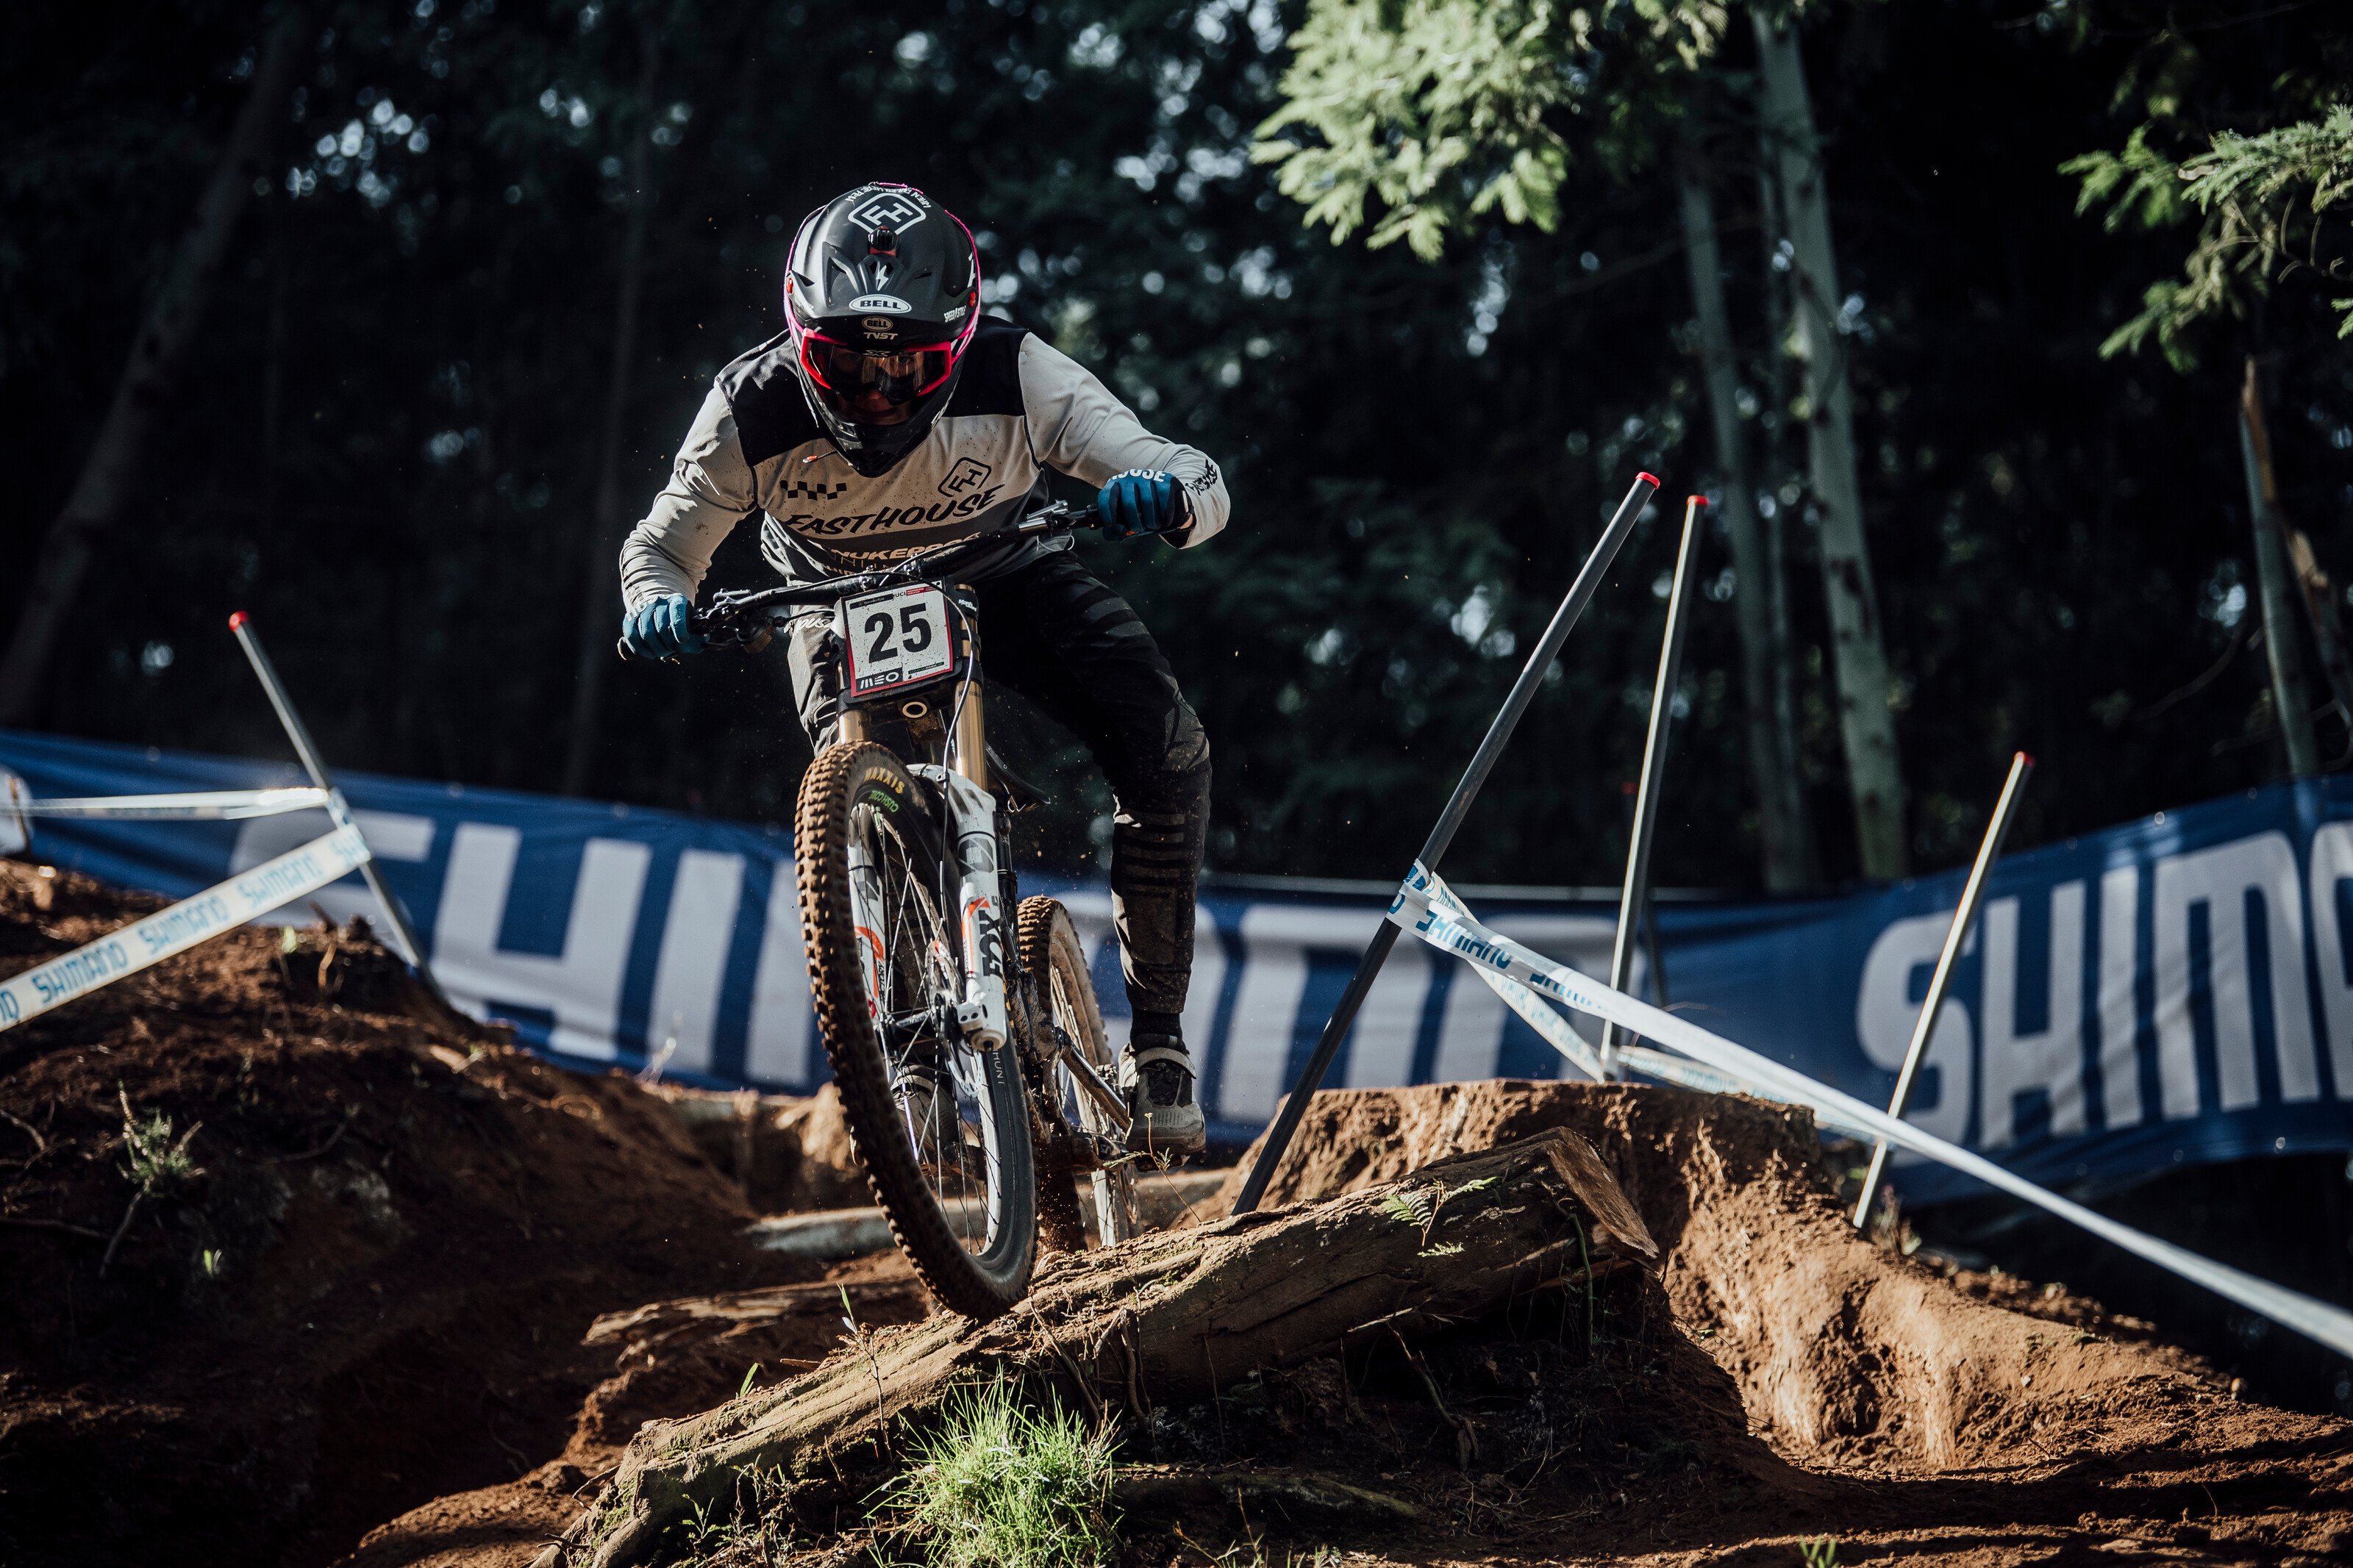 Jamie Edmondson racing his way to fourth at the final Lousã World Cup